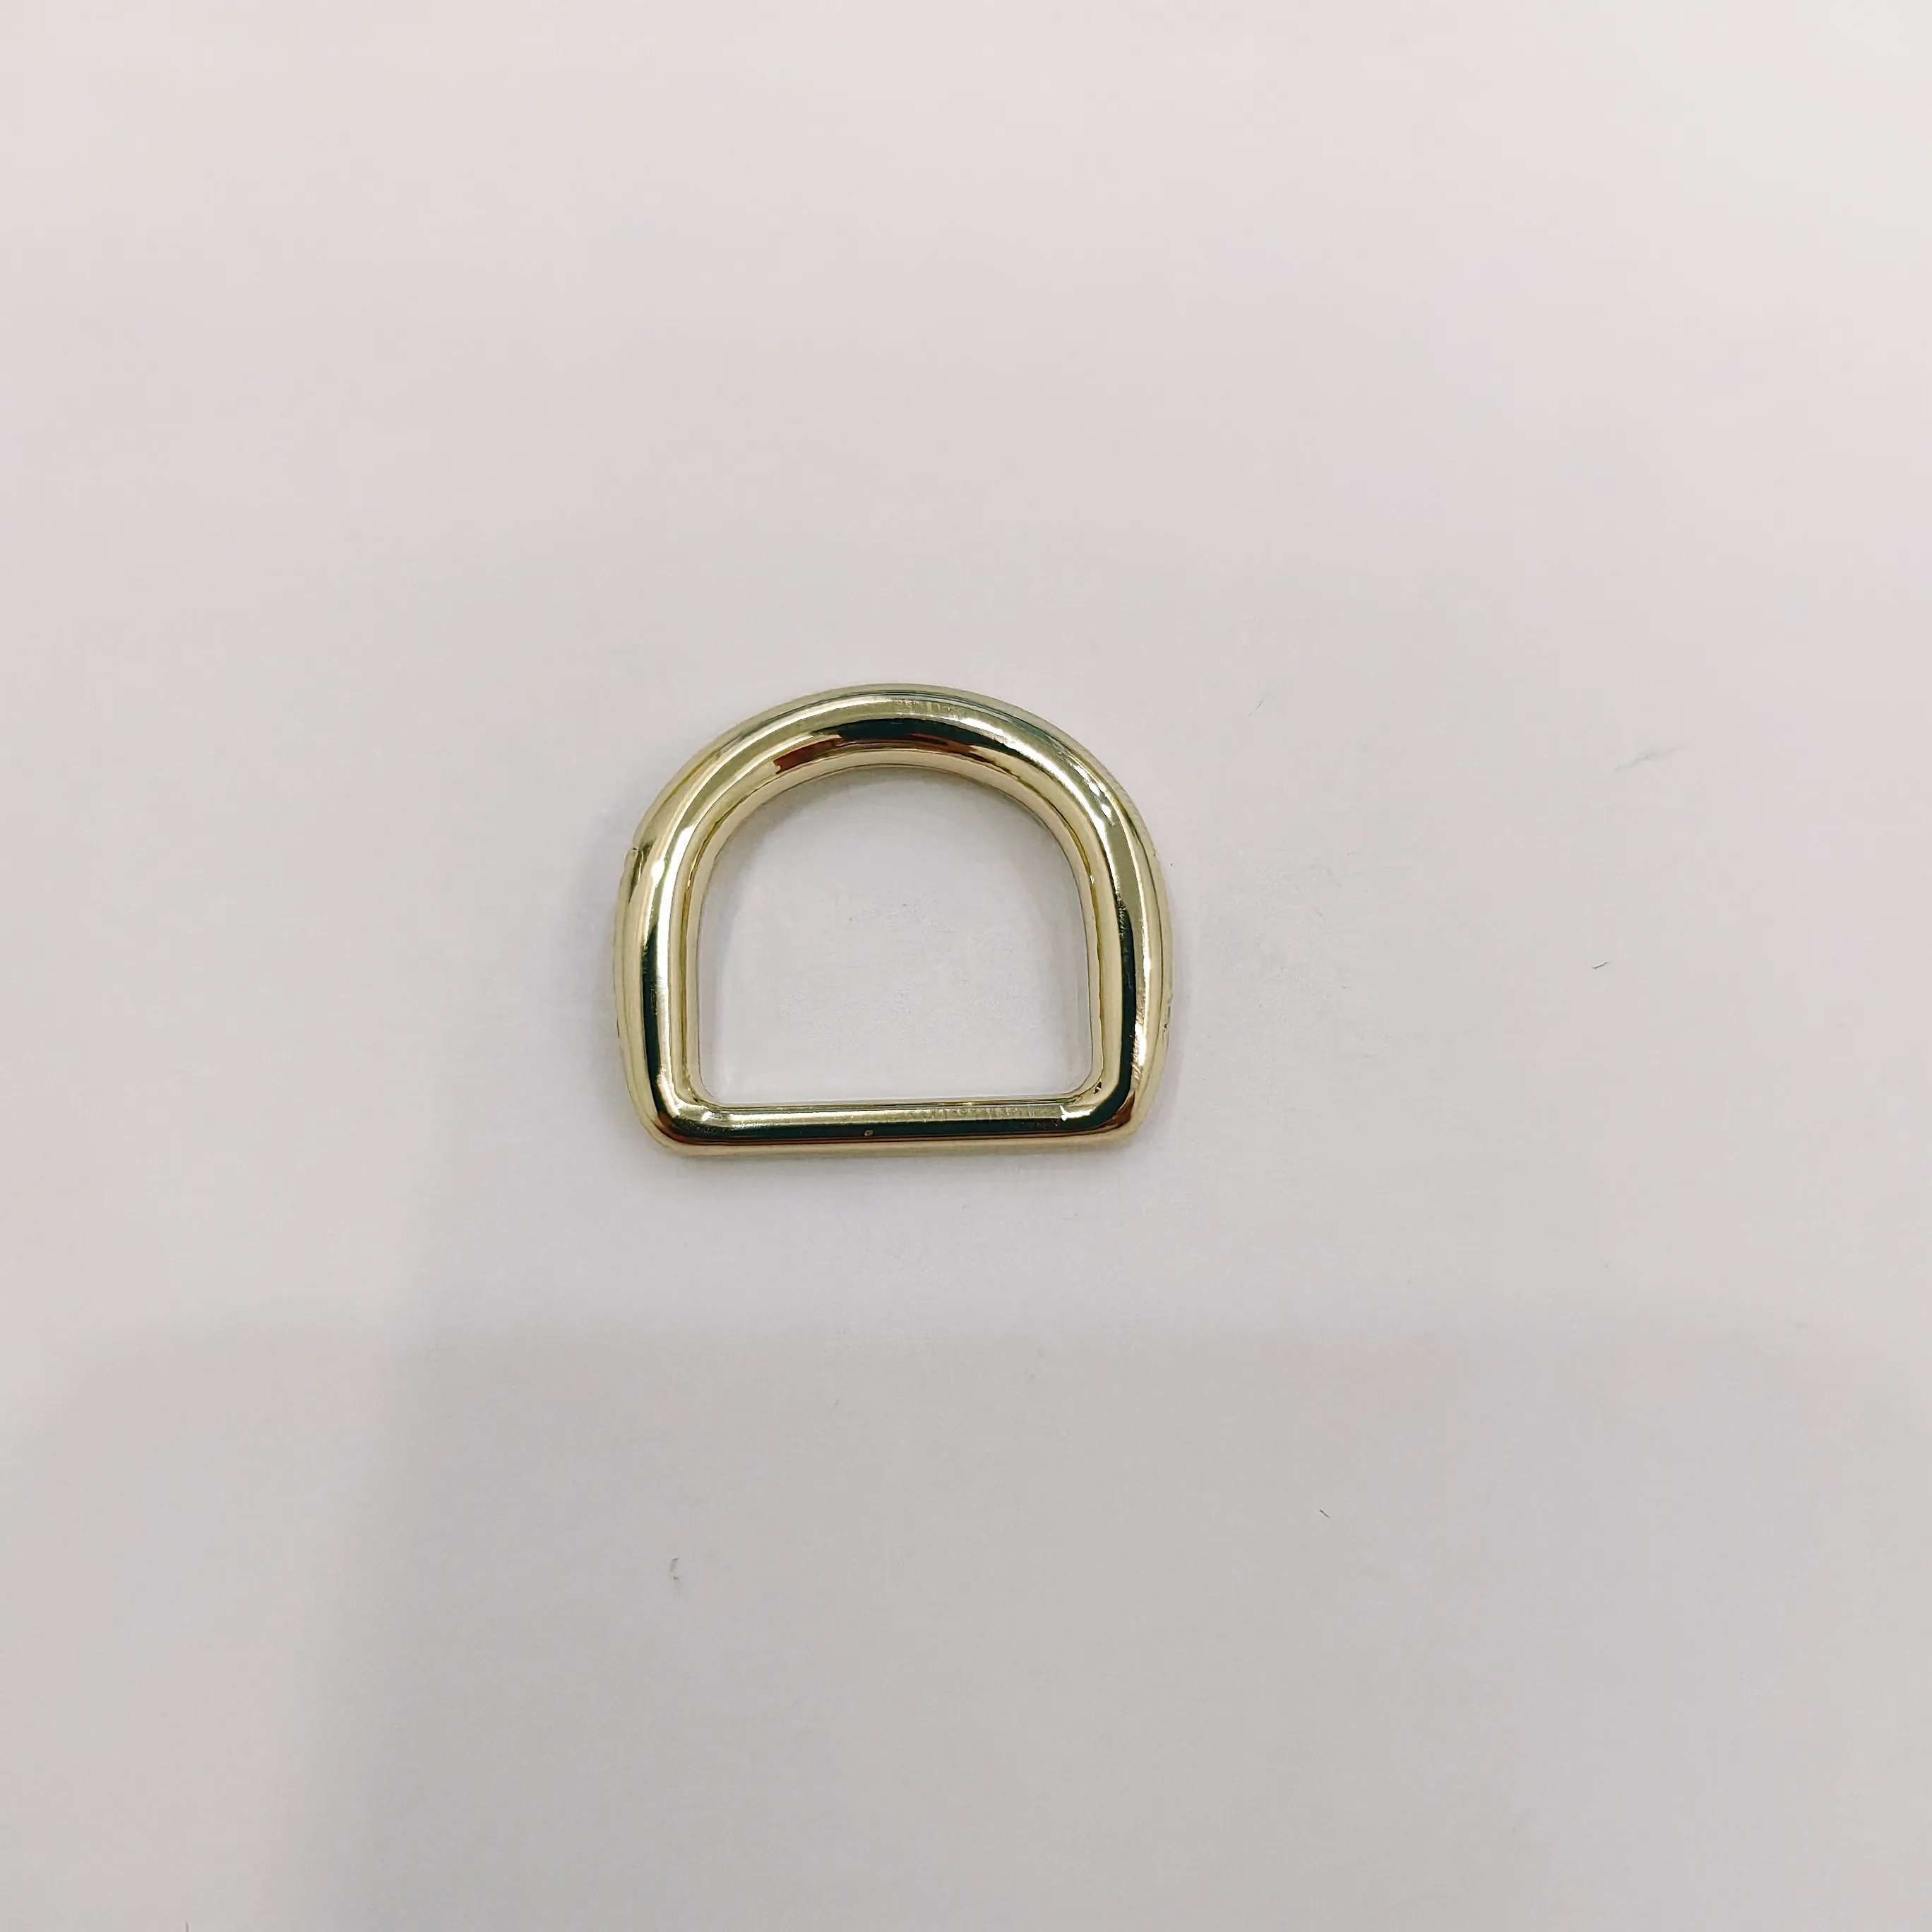 Guangdong Youshun Strong Customized Handbag Accessories High End Quality low MOQ Zinc Alloy D Ring